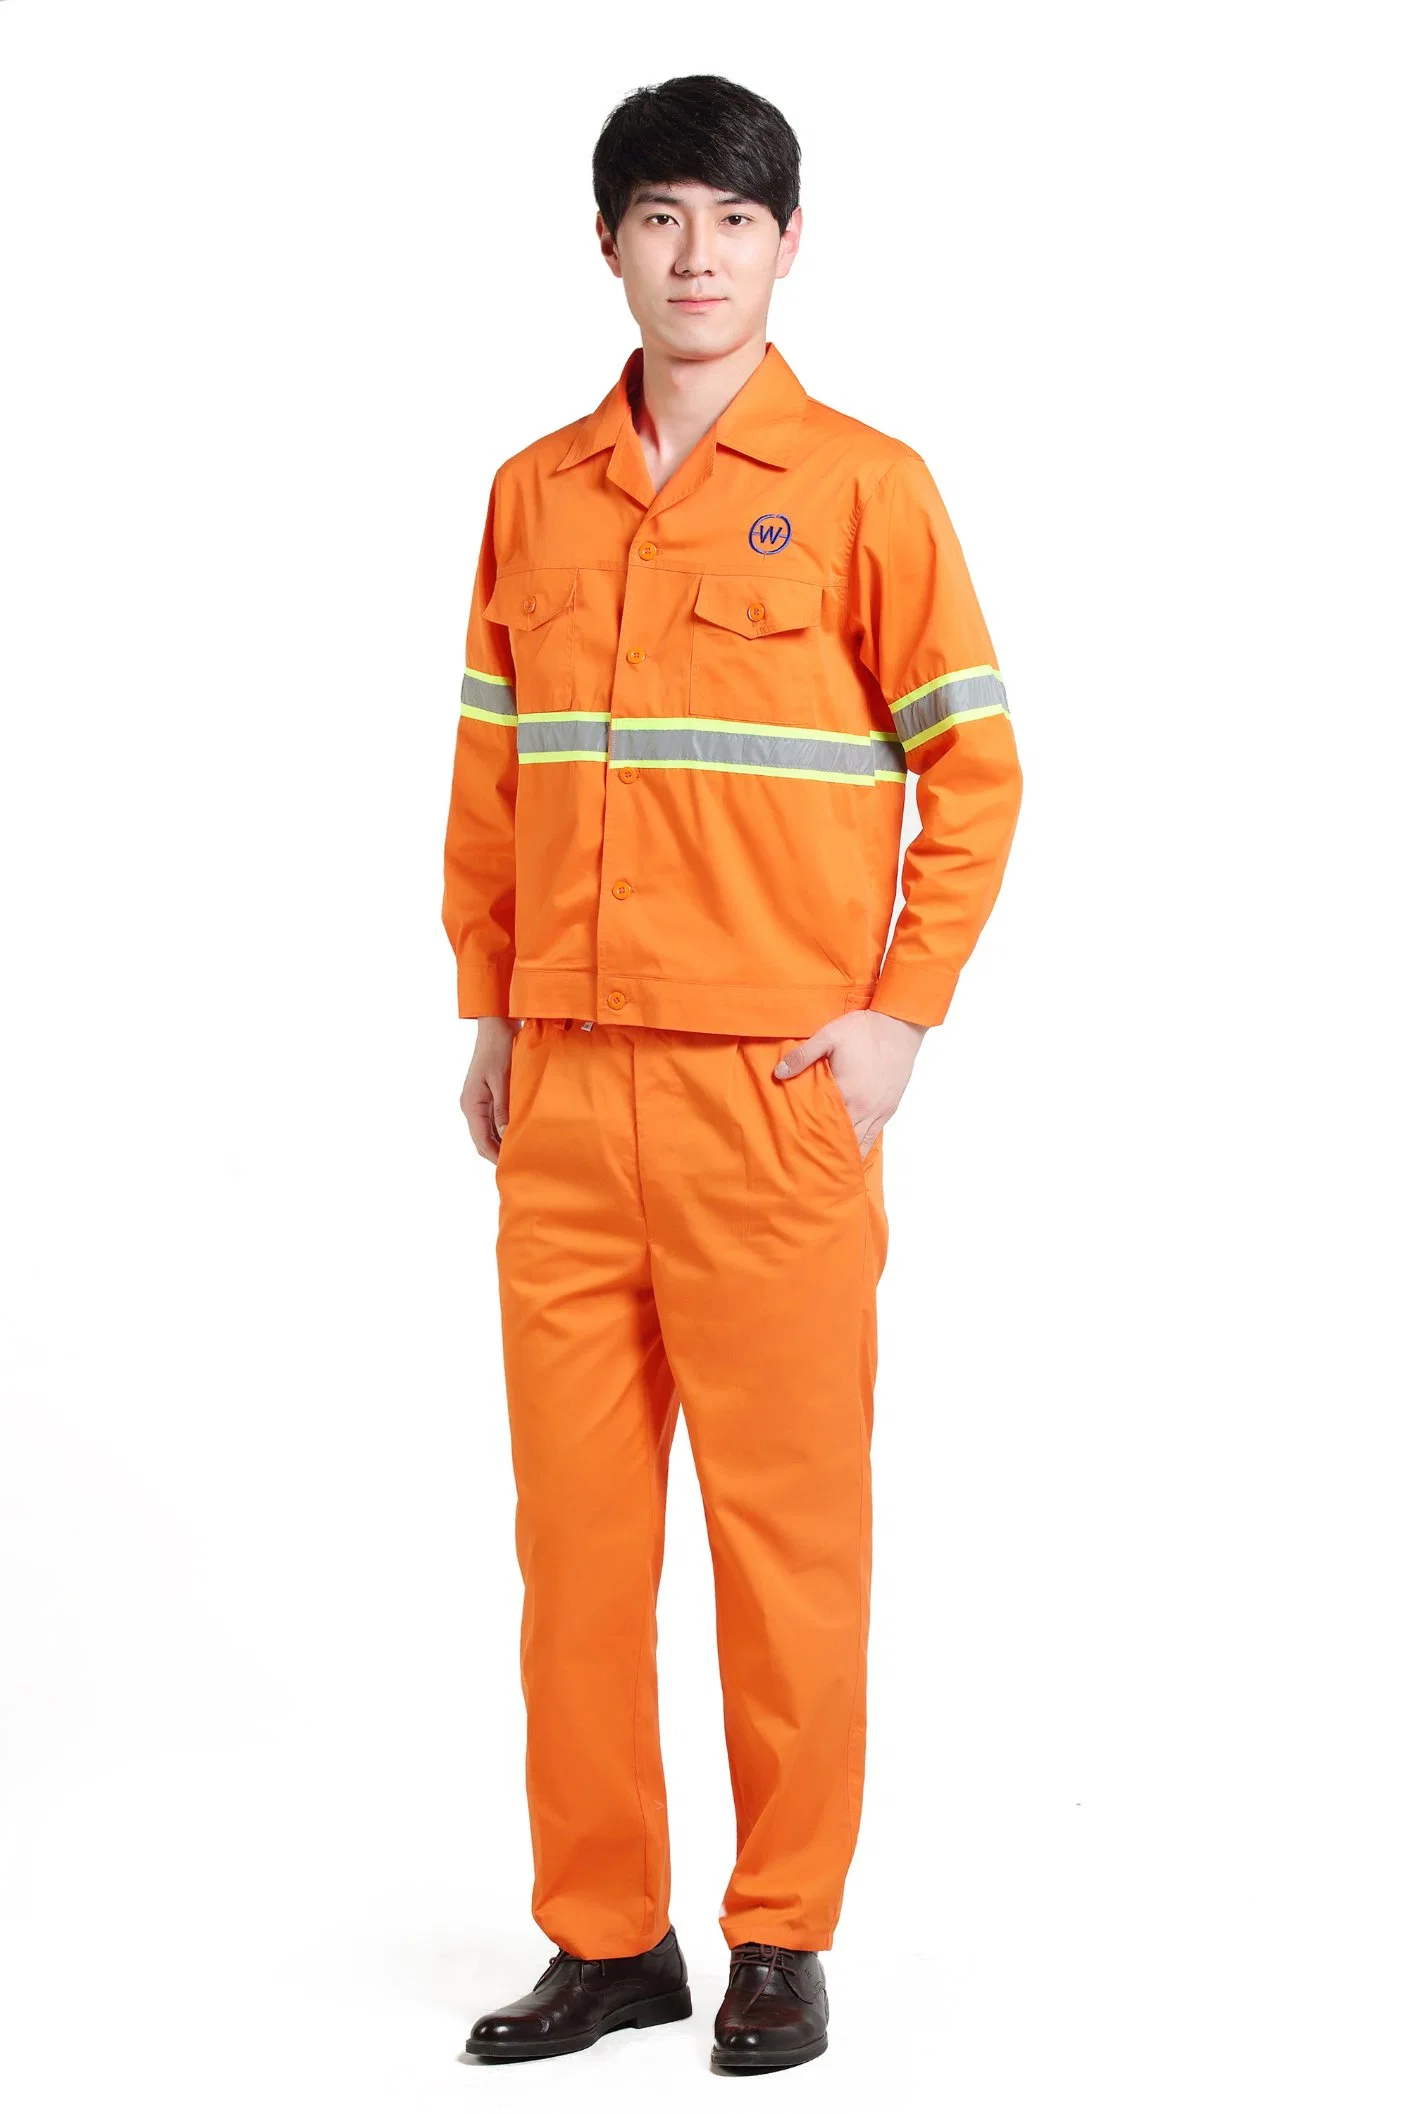 OEM Top Quality Product Fire Retardant Coverall Work Wear Safety Clothing Reflective Coverall Suit Sets